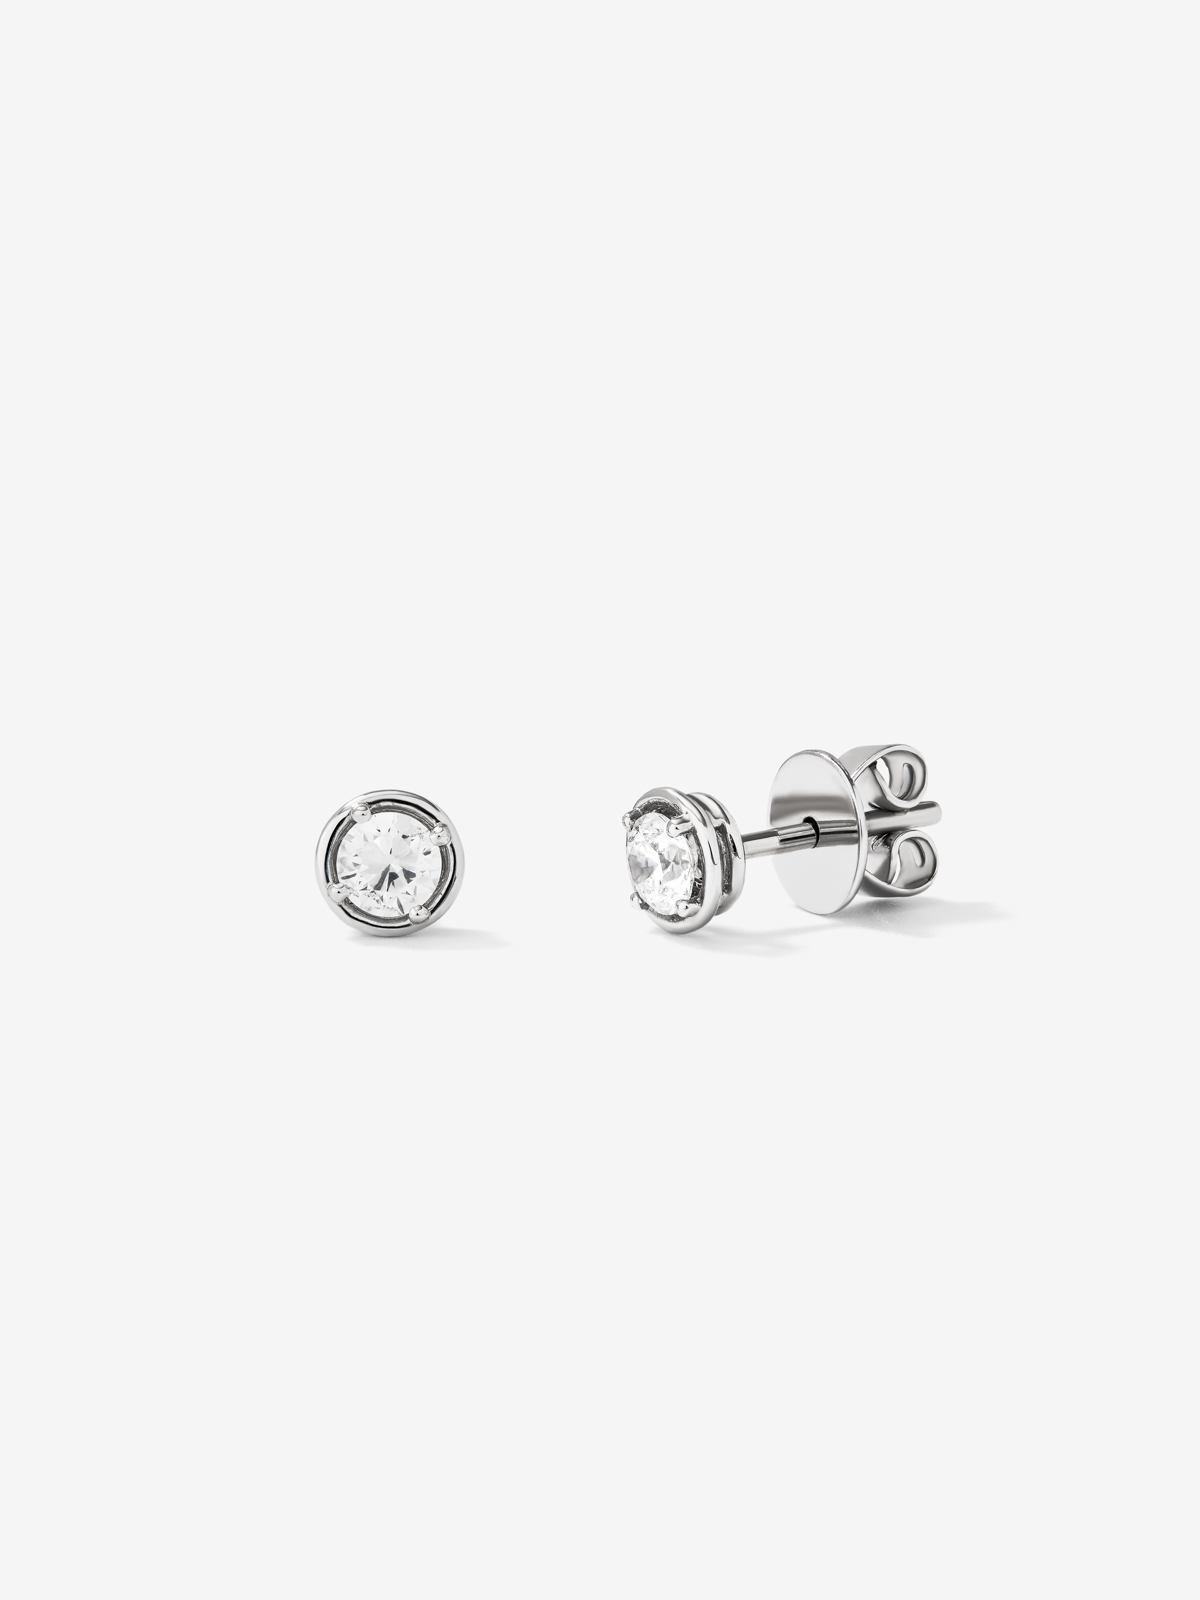 18K white gold earrings with solitary diamond.